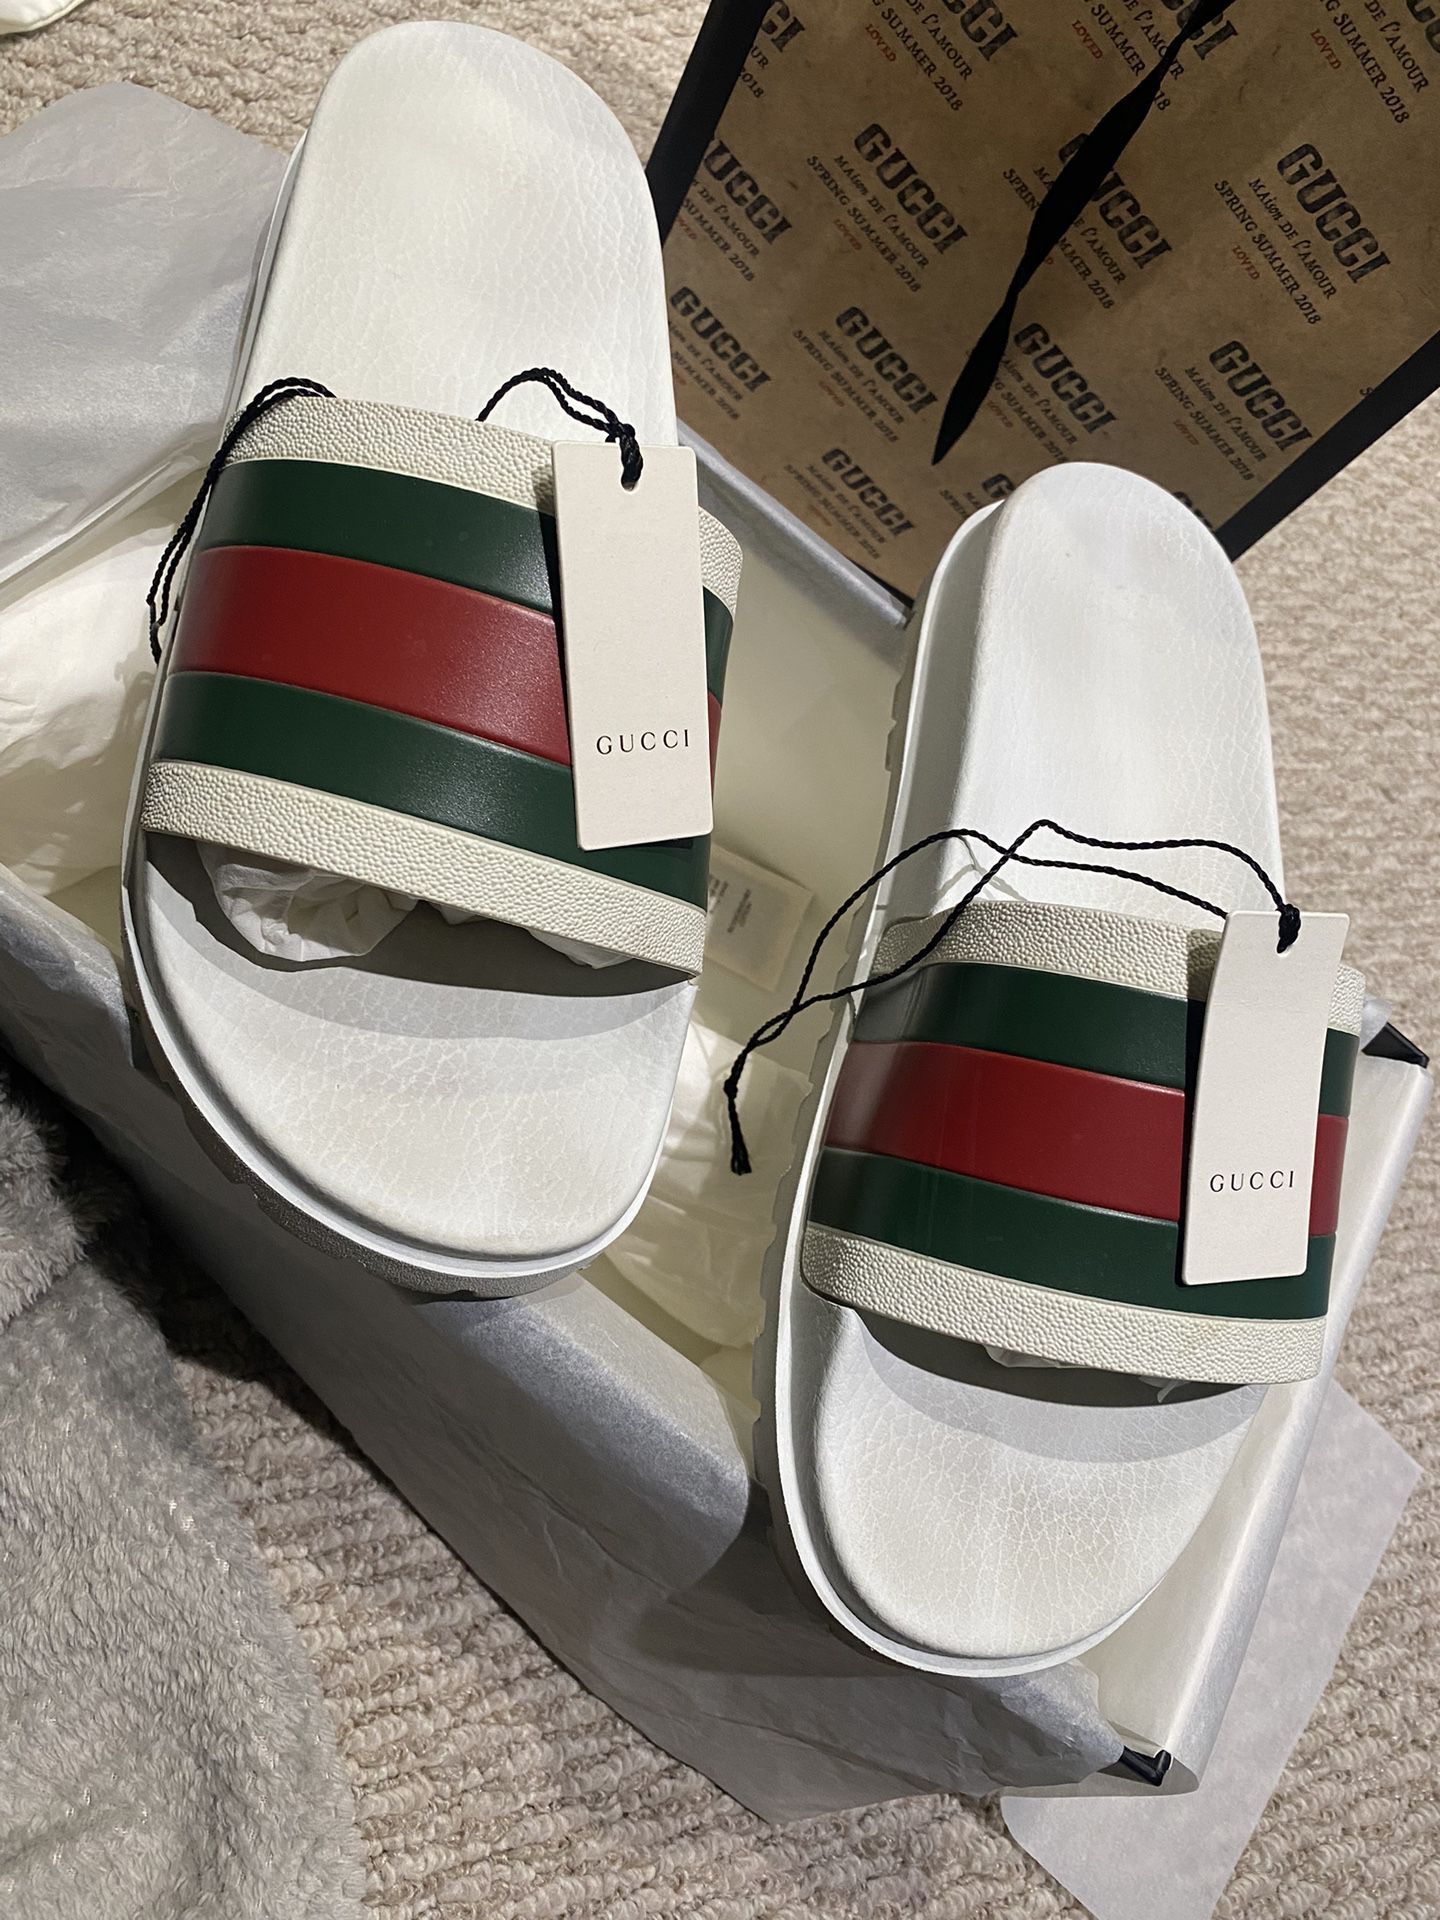 studie melodi Fabrikant Gucci Sandals for Sale in San Clemente, CA - OfferUp